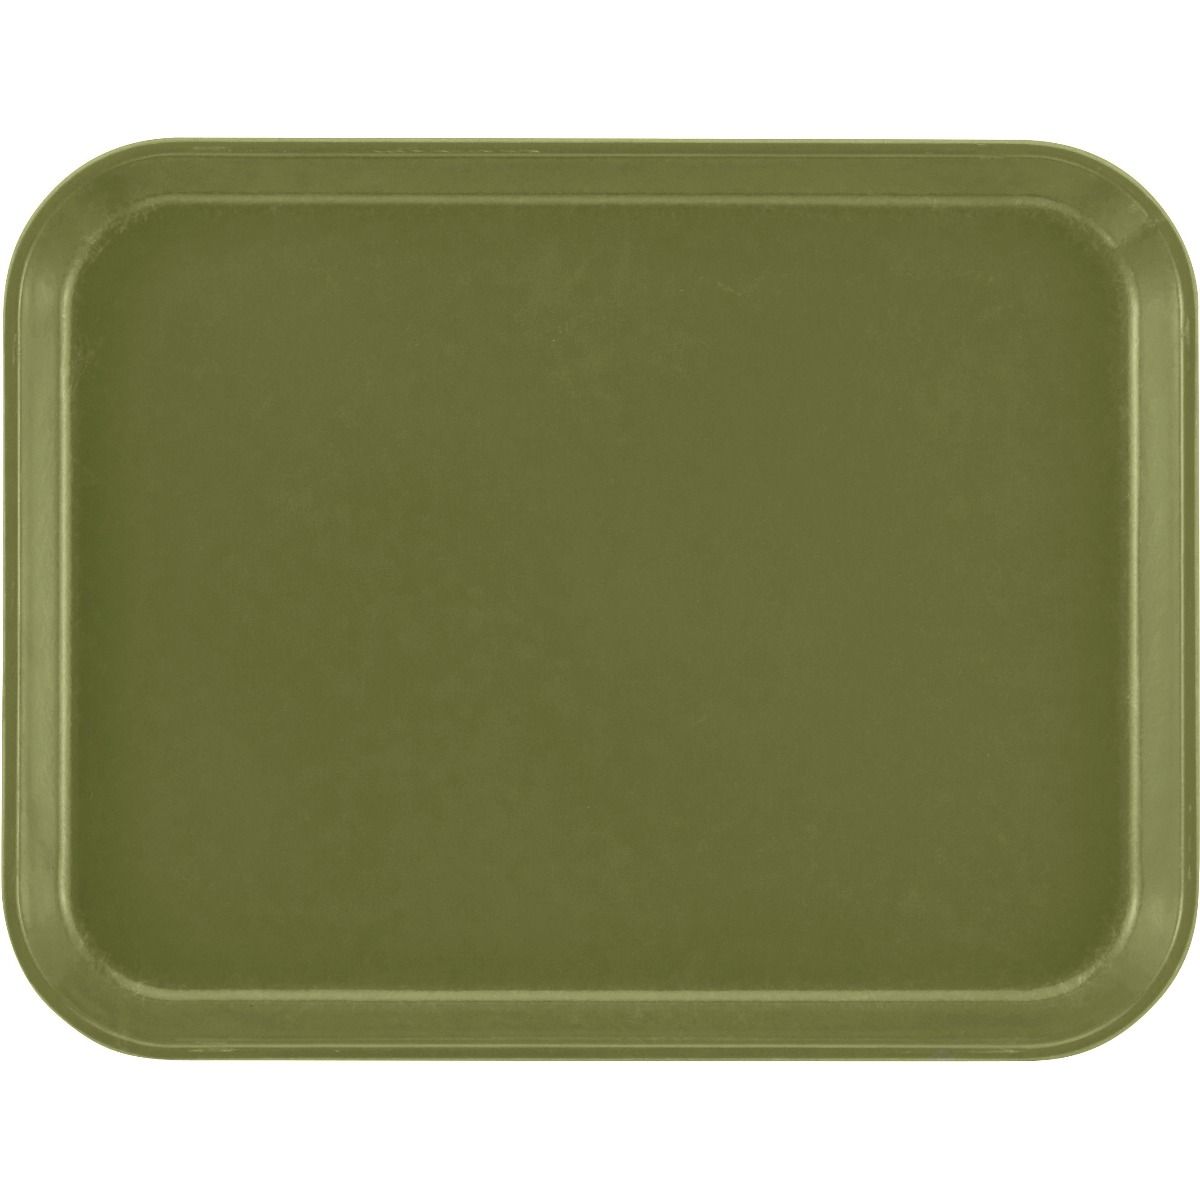 Camtray Fire Engine Red 12/cs Details about   Cambro 1216118 12x16 Fiberglass Cafeteria Tray 